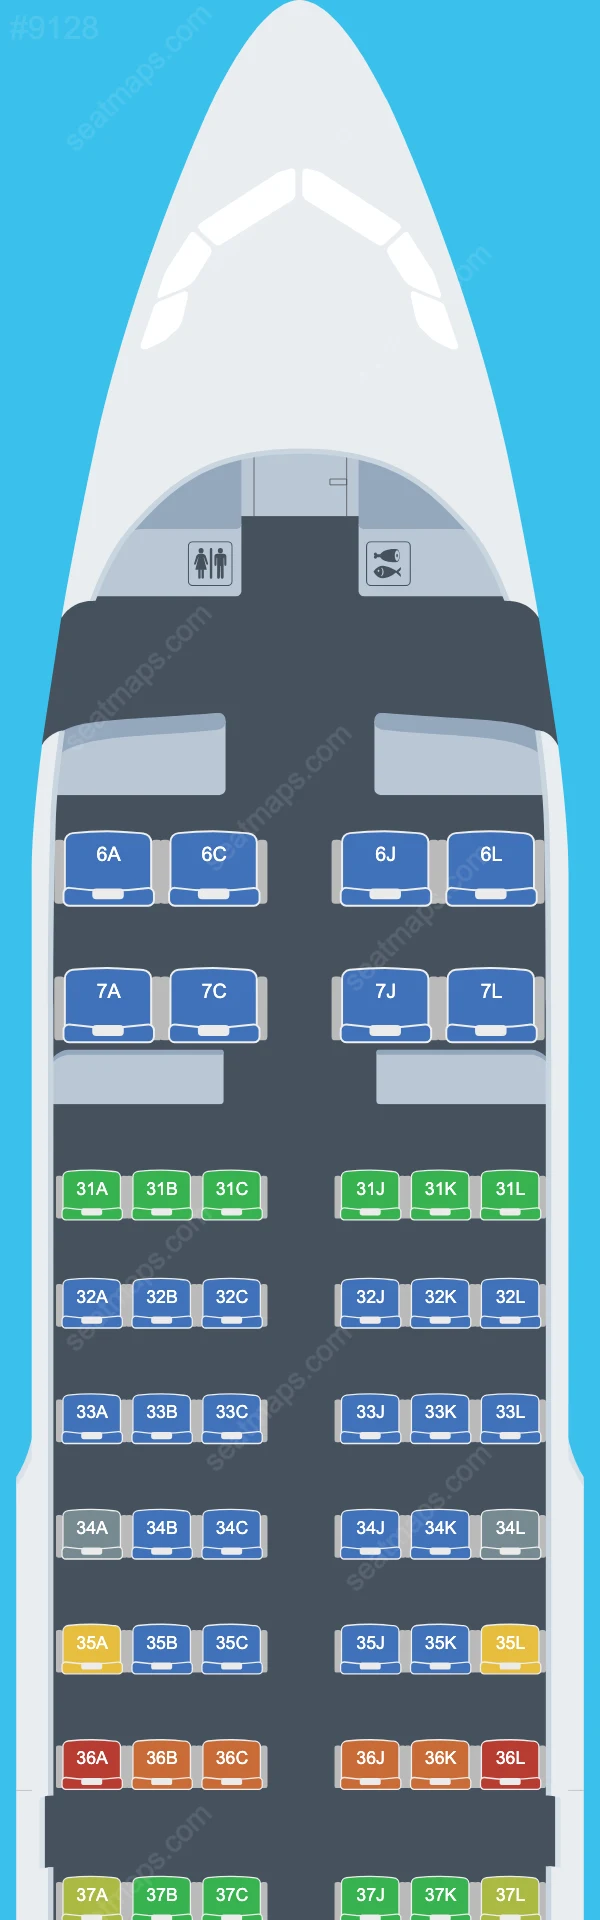 China Eastern Airbus A319 Seat Maps A319-100 V.2